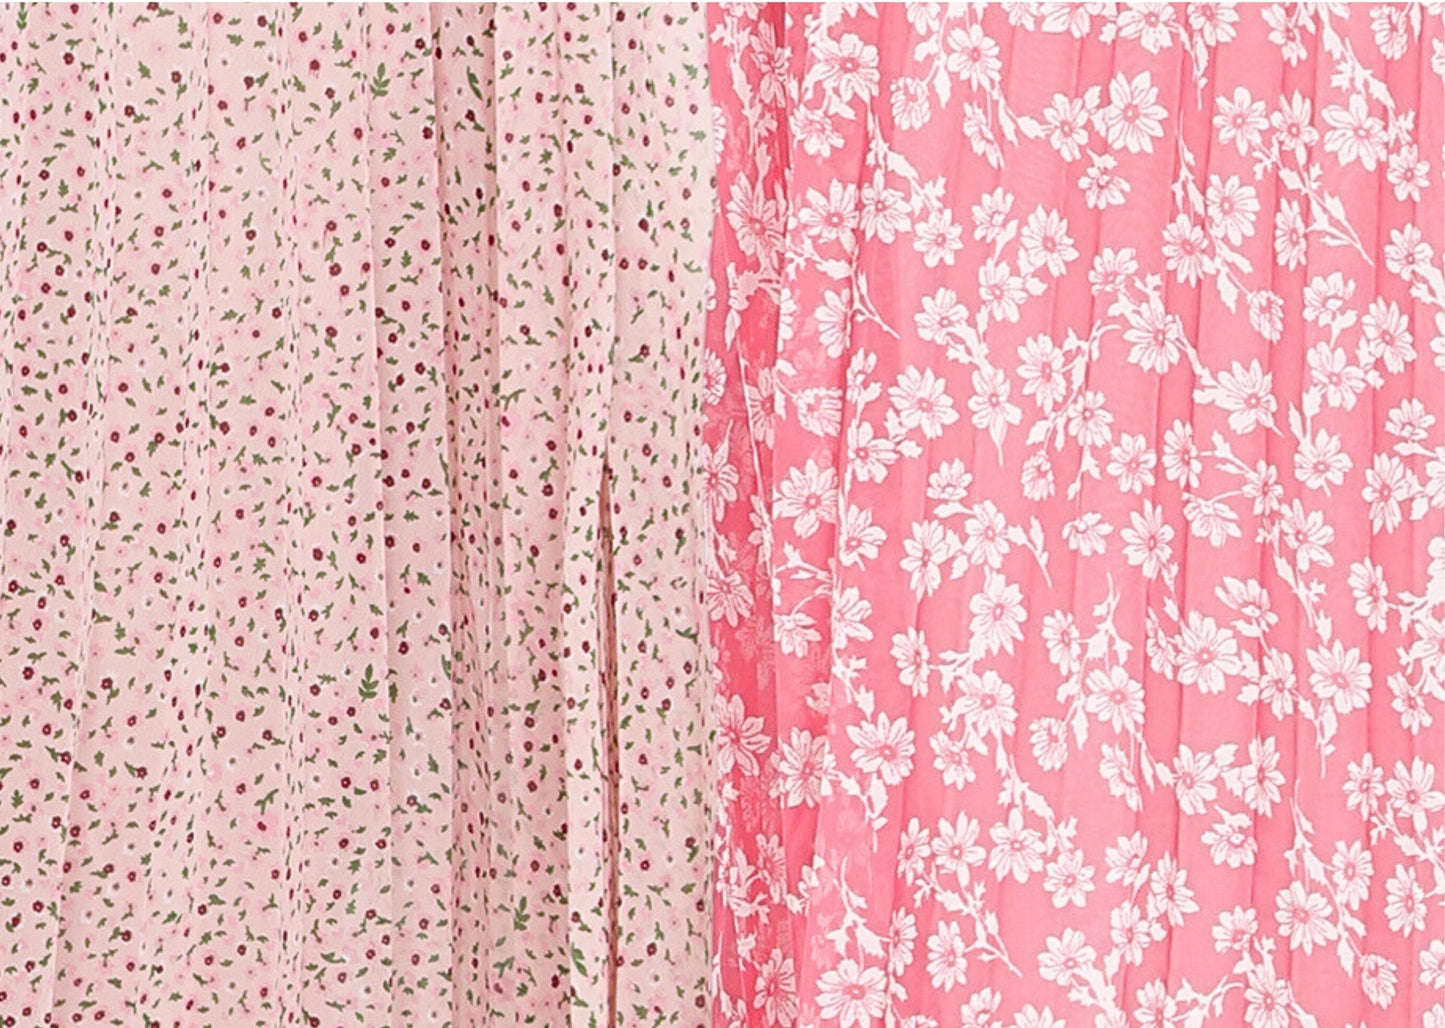 Women Georgette Floral Printed Skirts-Pack of Two-Pink and Baby Pink